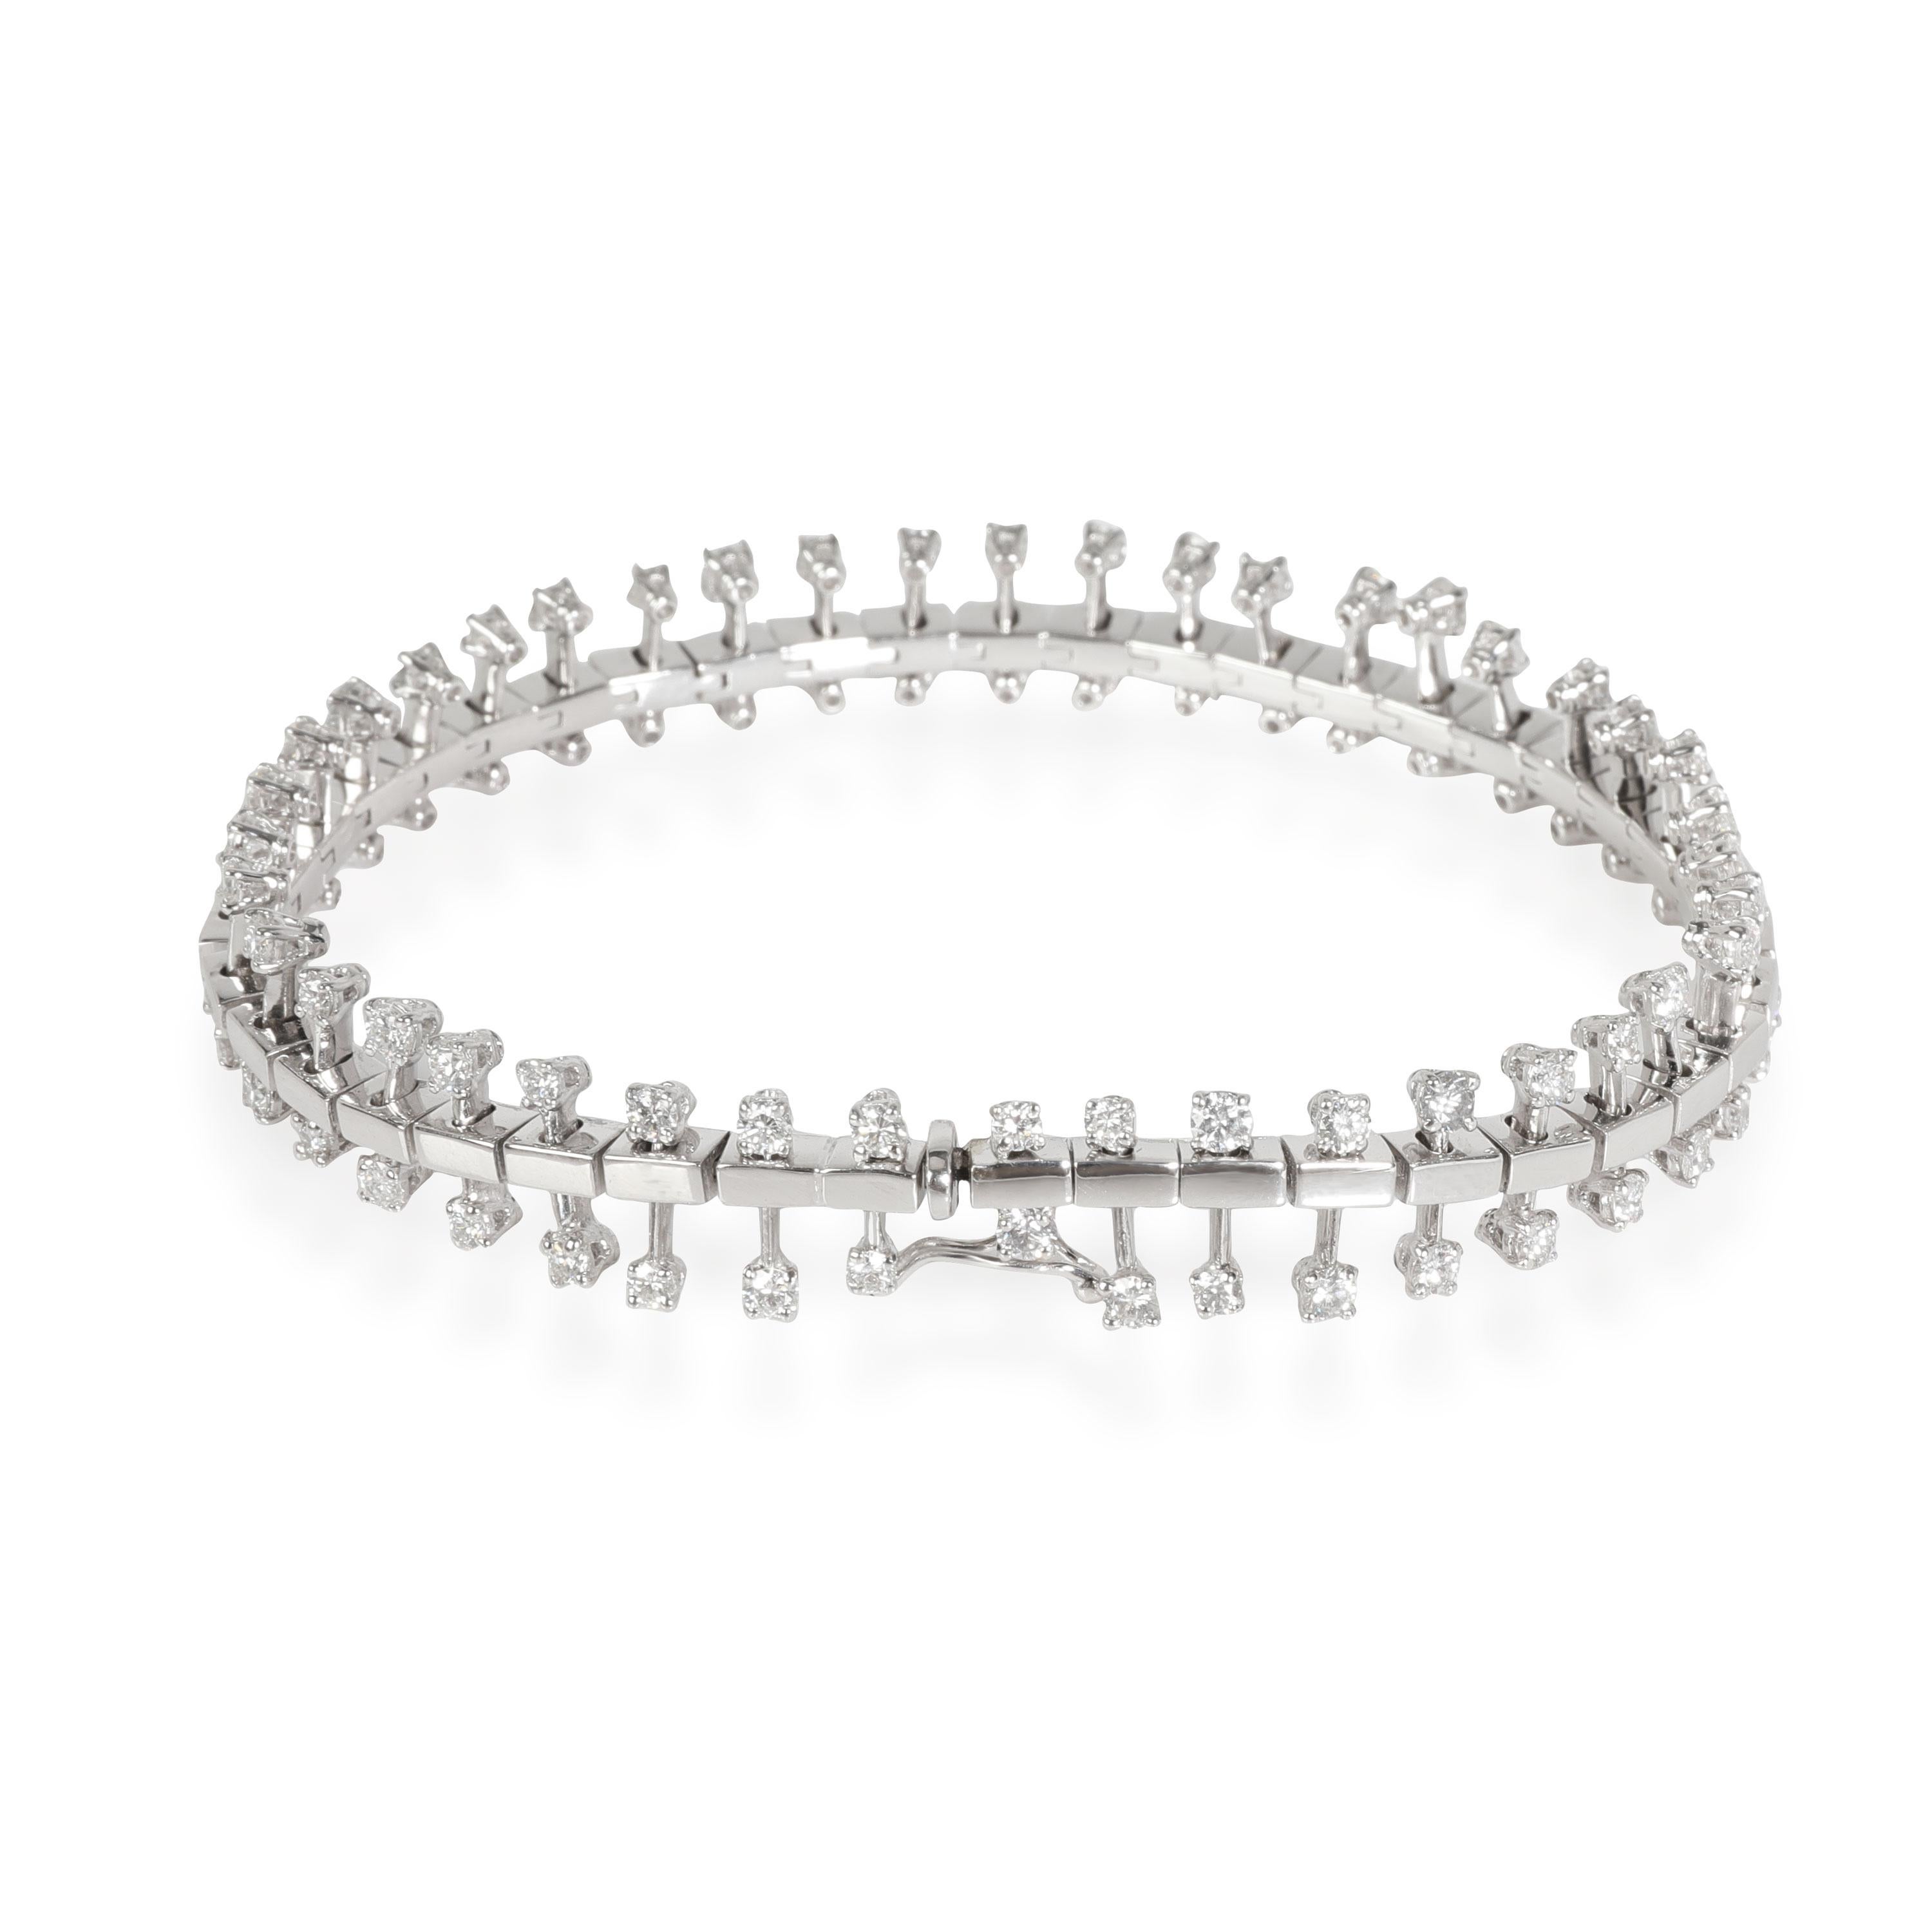 Damiani Diamond Bracelet in 18K White Gold 3.15 Ctw

PRIMARY DETAILS
SKU: 116471
Listing Title: Damiani Diamond Bracelet in 18K White Gold 3.15 Ctw
Condition Description: Retails for 8500 USD. In excellent condition and recently polished. Chain is 7